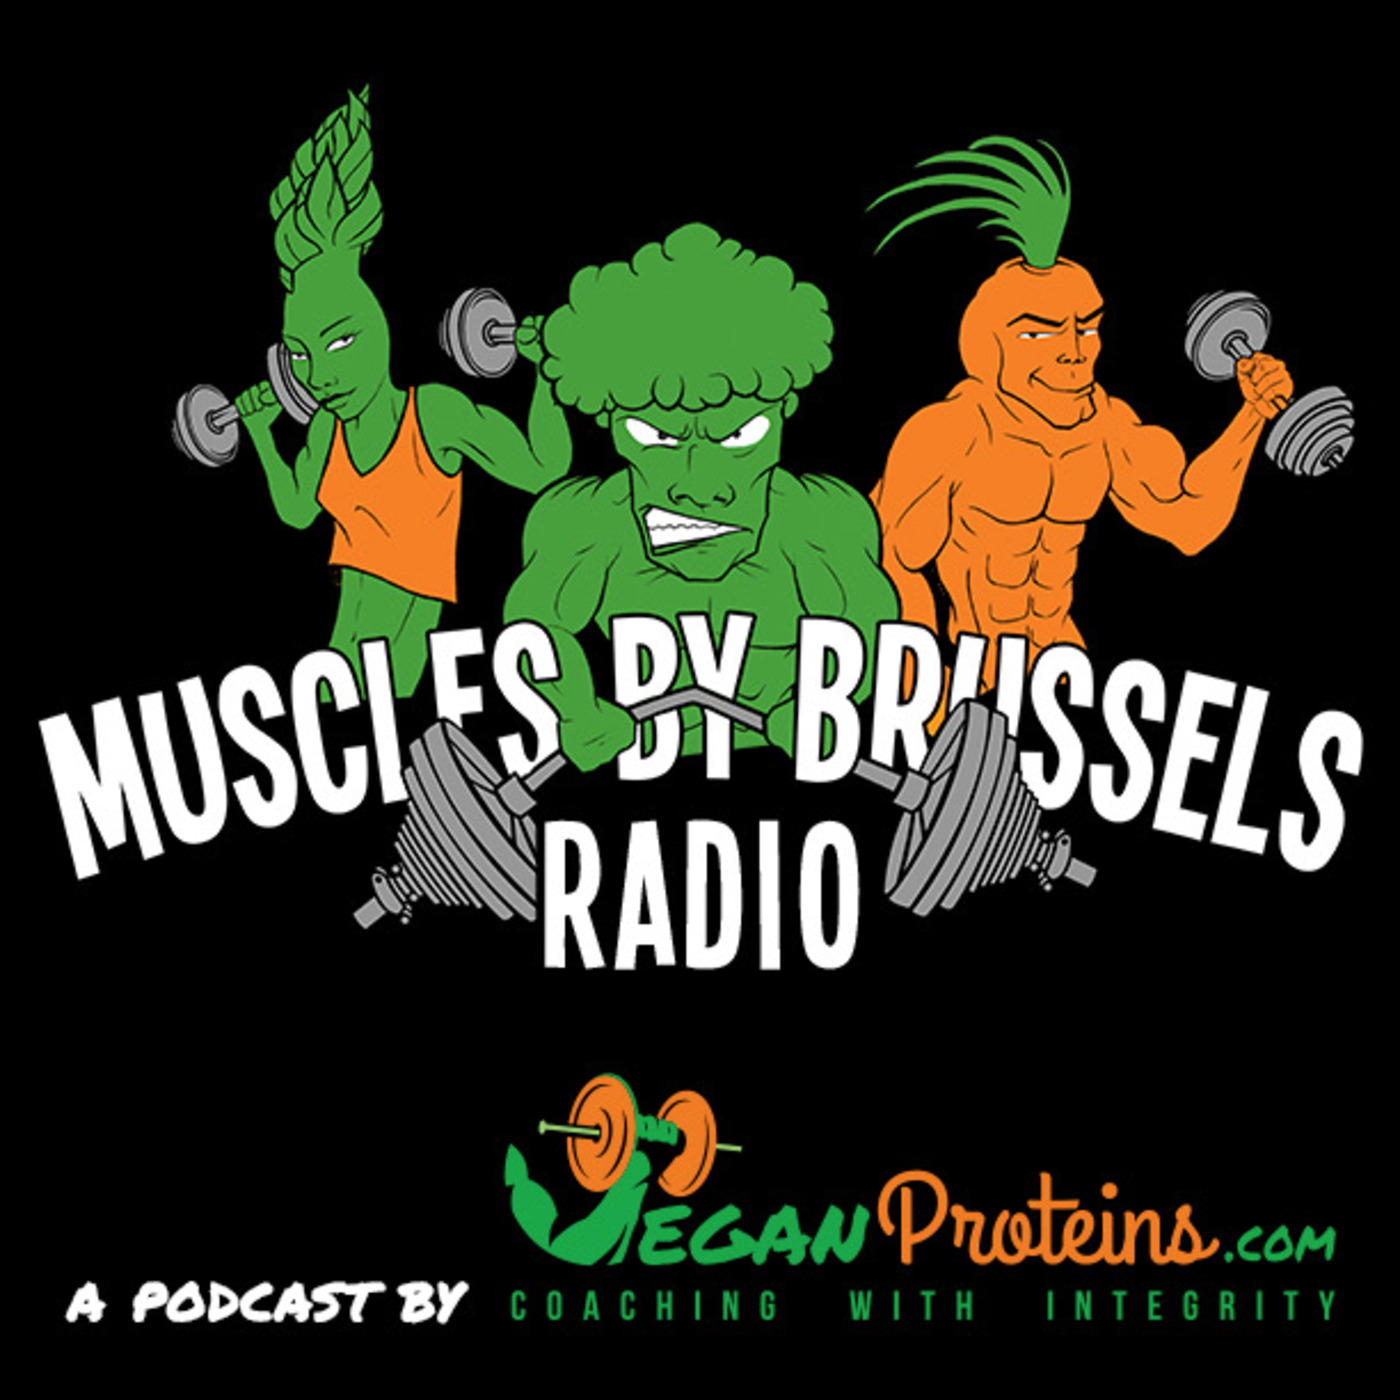 Muscles by Brussels Radio!